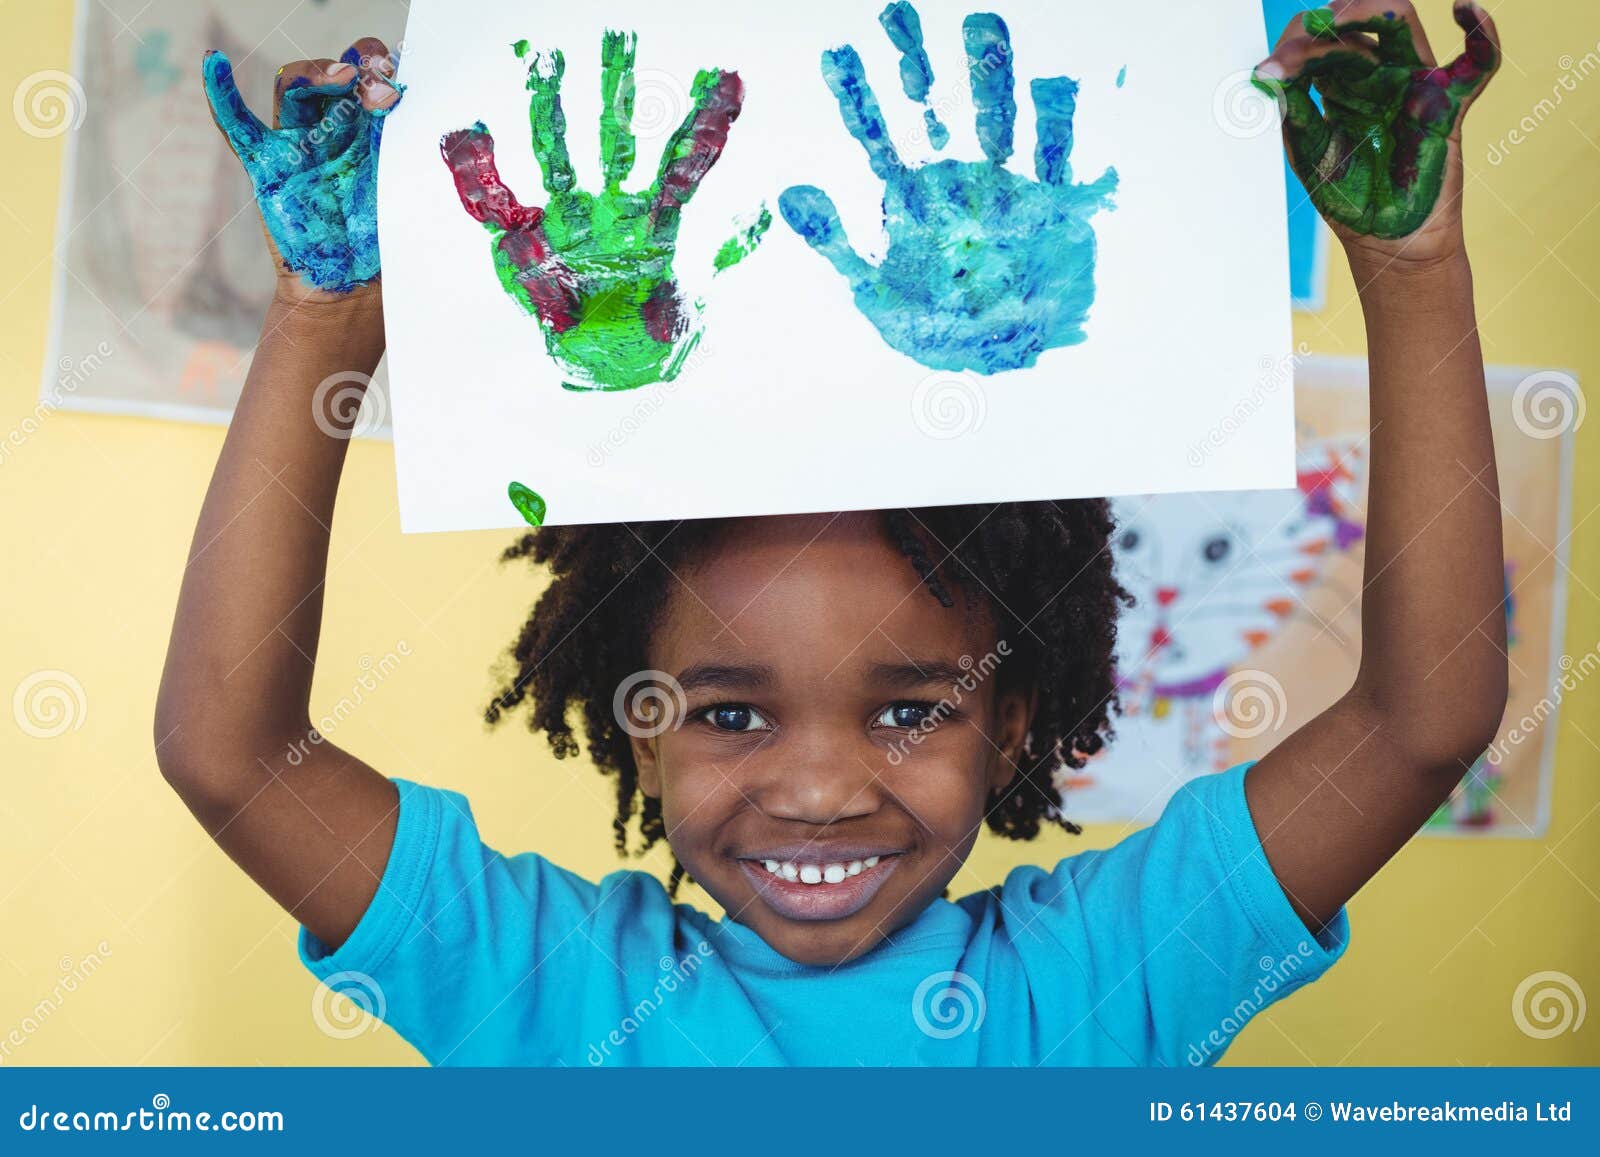 290+ Kids Carpet Paint Stock Photos, Pictures & Royalty-Free